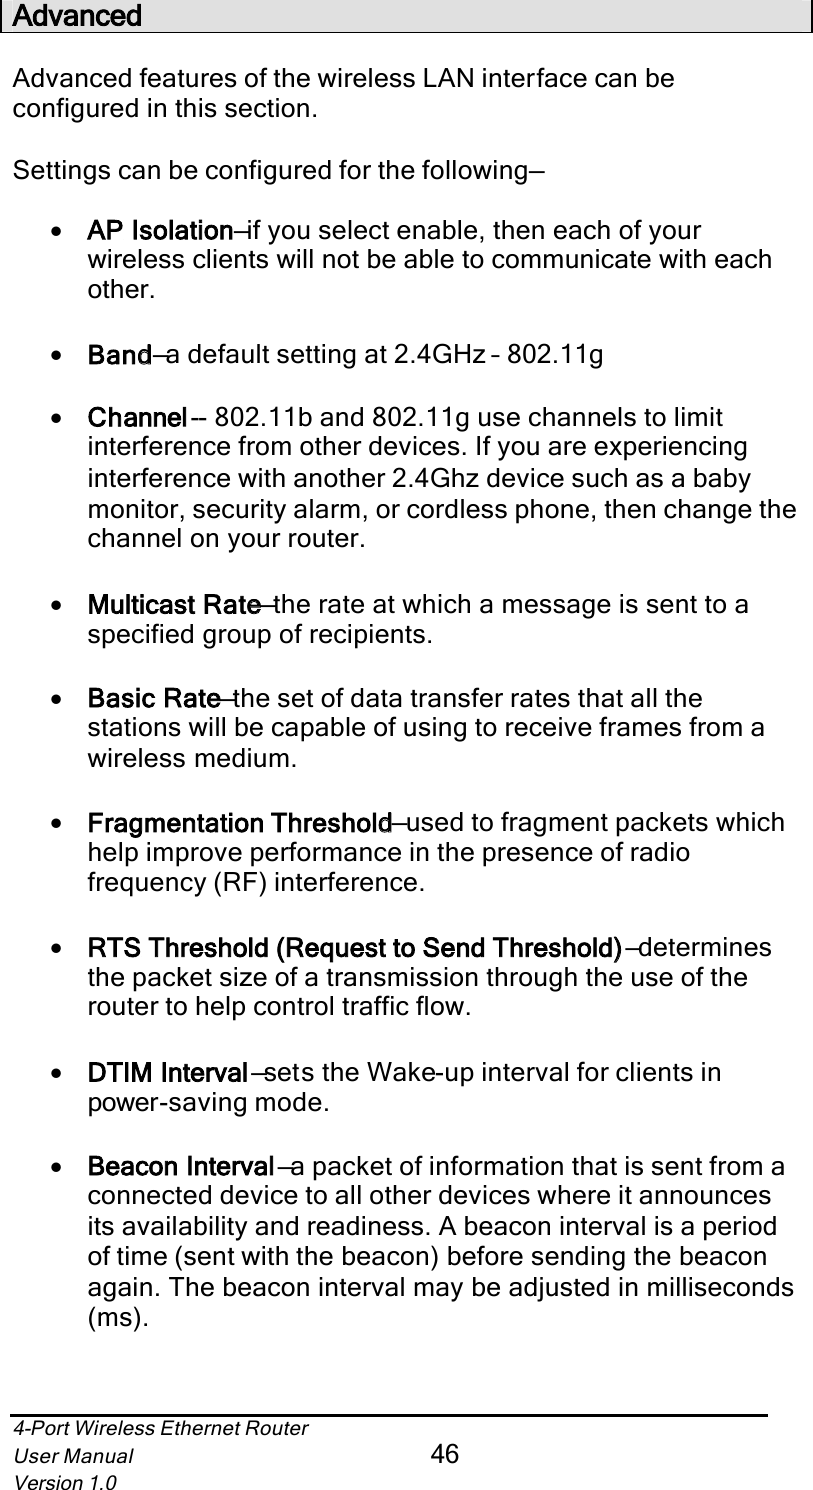 4-Port Wireless Ethernet RouterUser Manual46Version 1.0AdvancedAdvanced features of the wireless LAN interface can be configured in this section.Settings can be configured for the following—•AP Isolationn—if you select enable, then each of your wireless clients will not be able to communicate with each other.•Bandd—a default setting at 2.4GHz – 802.11g•Channell-- 802.11b and 802.11g use channels to limit interference from other devices. If you are experiencing interference with another 2.4Ghz device such as a baby monitor, security alarm, or cordless phone, then change the channel on your router.•Multicast Ratee—the rate at which a message is sent to a specified group of recipients.•Basic Ratee—the set of data transfer rates that all the stations will be capable of using to receive frames from a wireless medium.•Fragmentation Thresholdd—used to fragment packets which help improve performance in the presence of radio frequency (RF) interference.•RTS Threshold (Request to Send Threshold)) —determinesthe packet size of a transmission through the use of the router to help control traffic flow. •DTIM Intervall—sets the Wake-up interval for clients in power-saving mode.•Beacon Intervall—a packet of information that is sent from a connected device to all other devices where it announces its availability and readiness. A beacon interval is a period of time (sent with the beacon) before sending the beacon again. The beacon interval may be adjusted in milliseconds (ms).